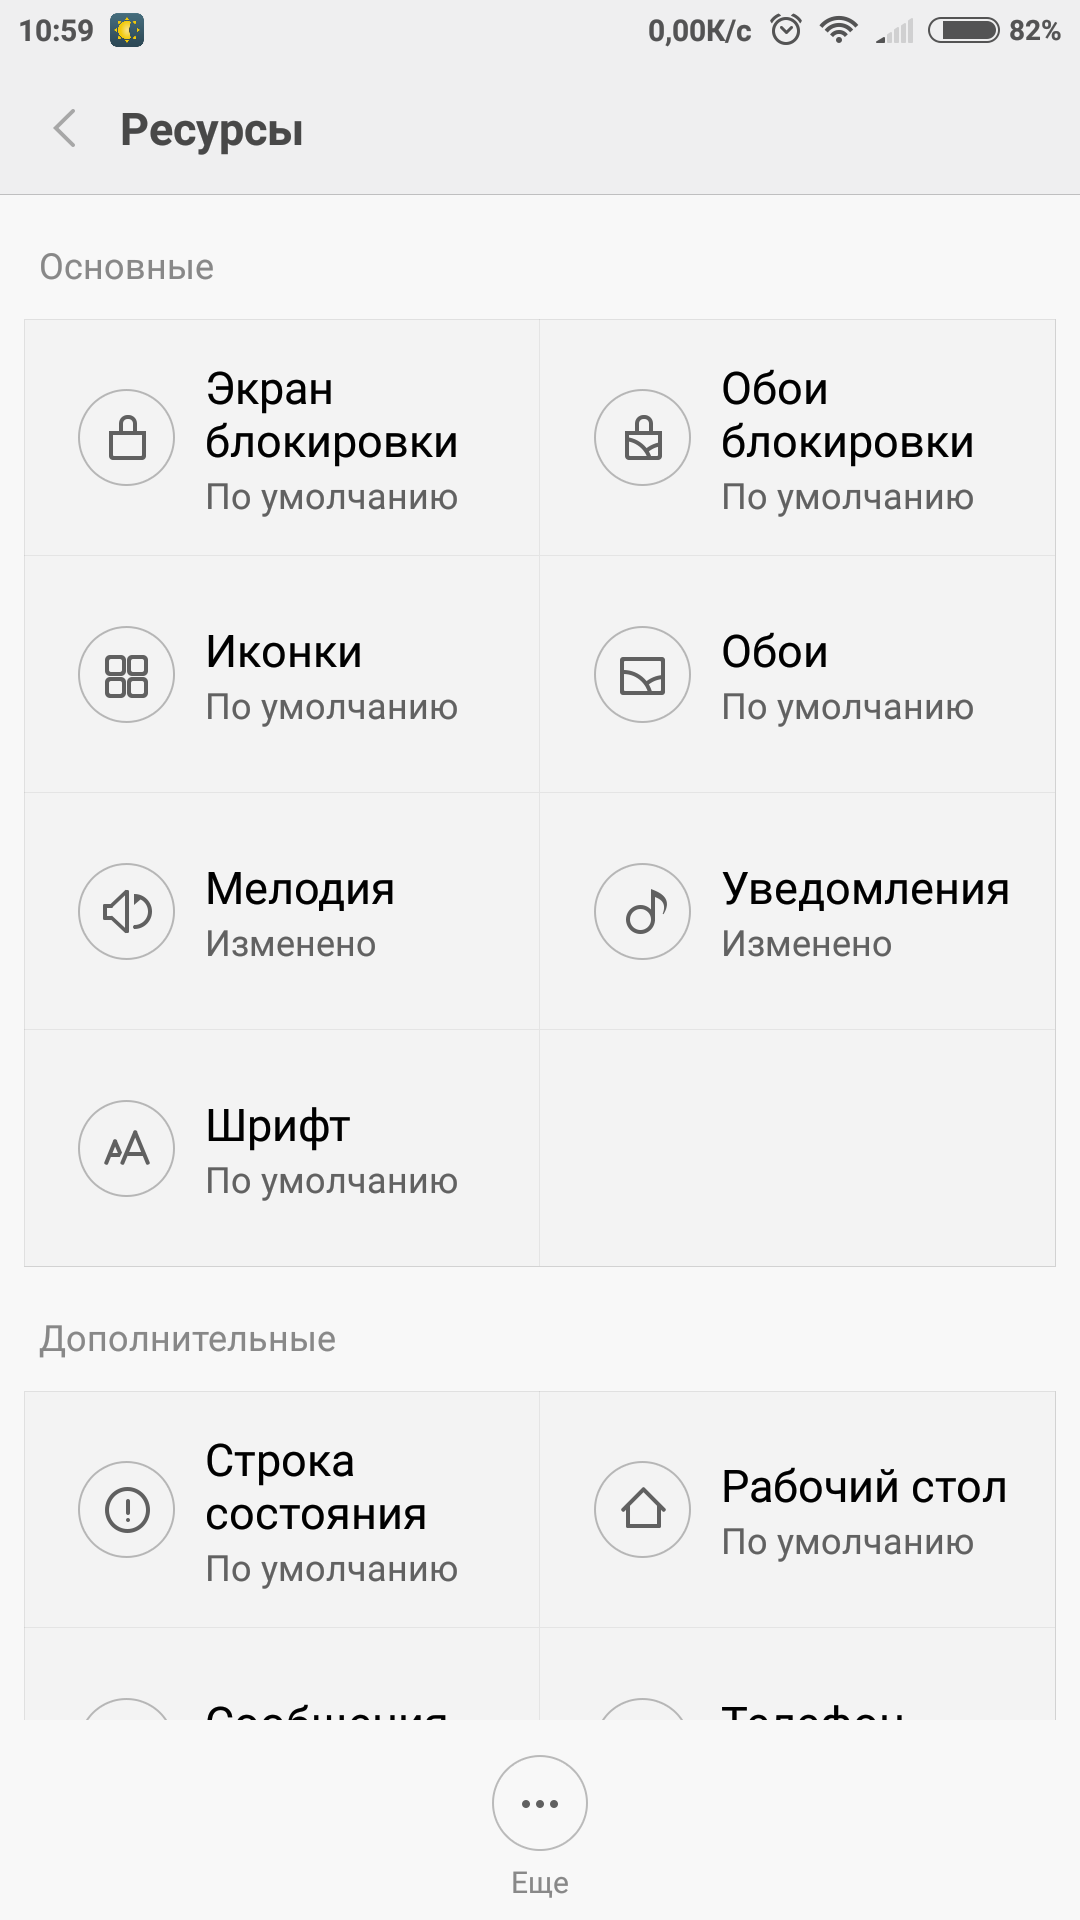 Screenshot_2016-02-13-10-59-14_com.android.thememanager.png